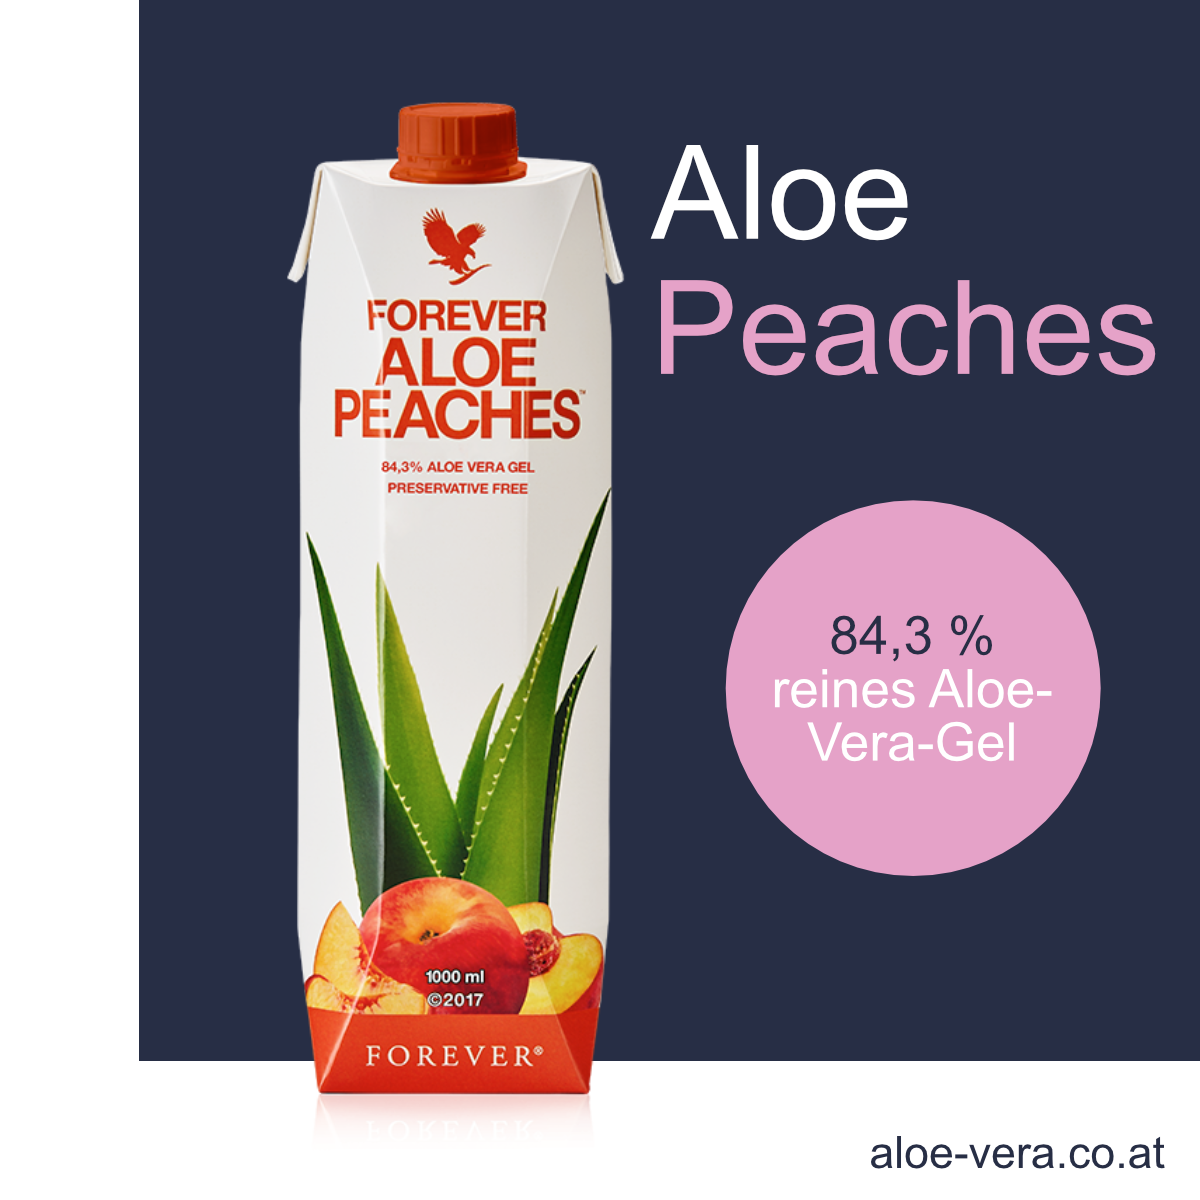 Forever Aloe Paches